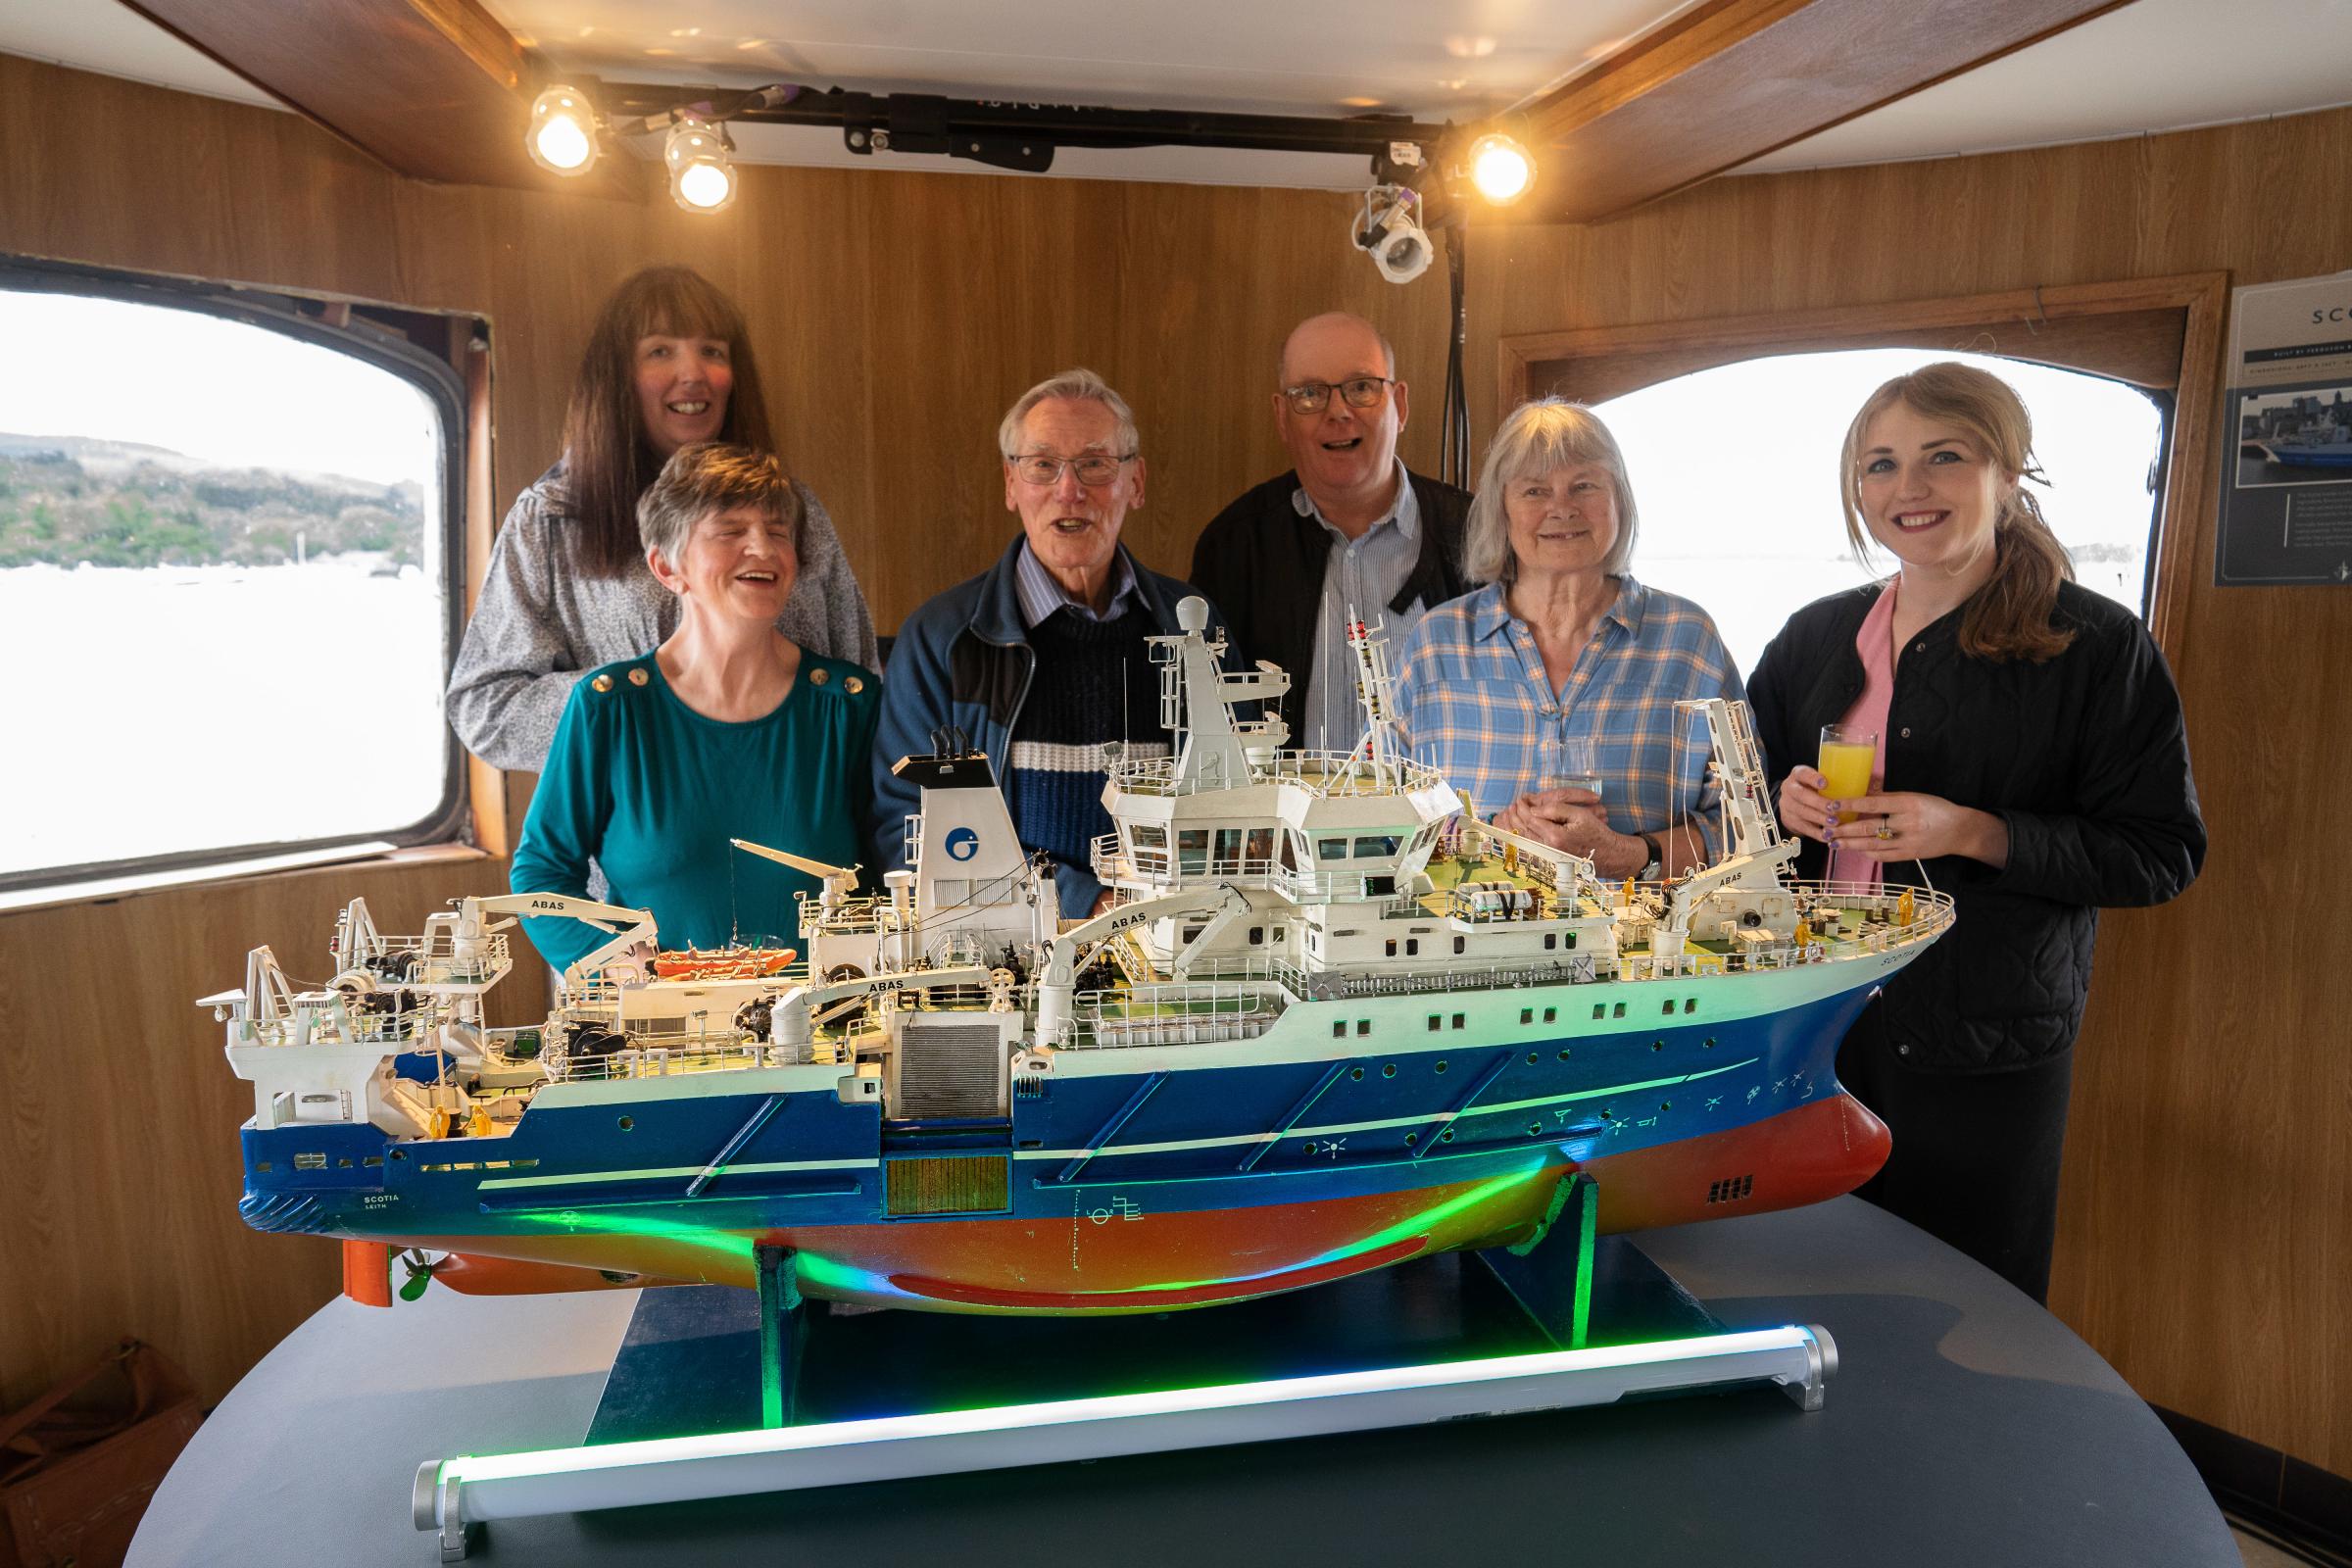 Maid of Loch: Model ship builder’s work unveiled in new exhibition